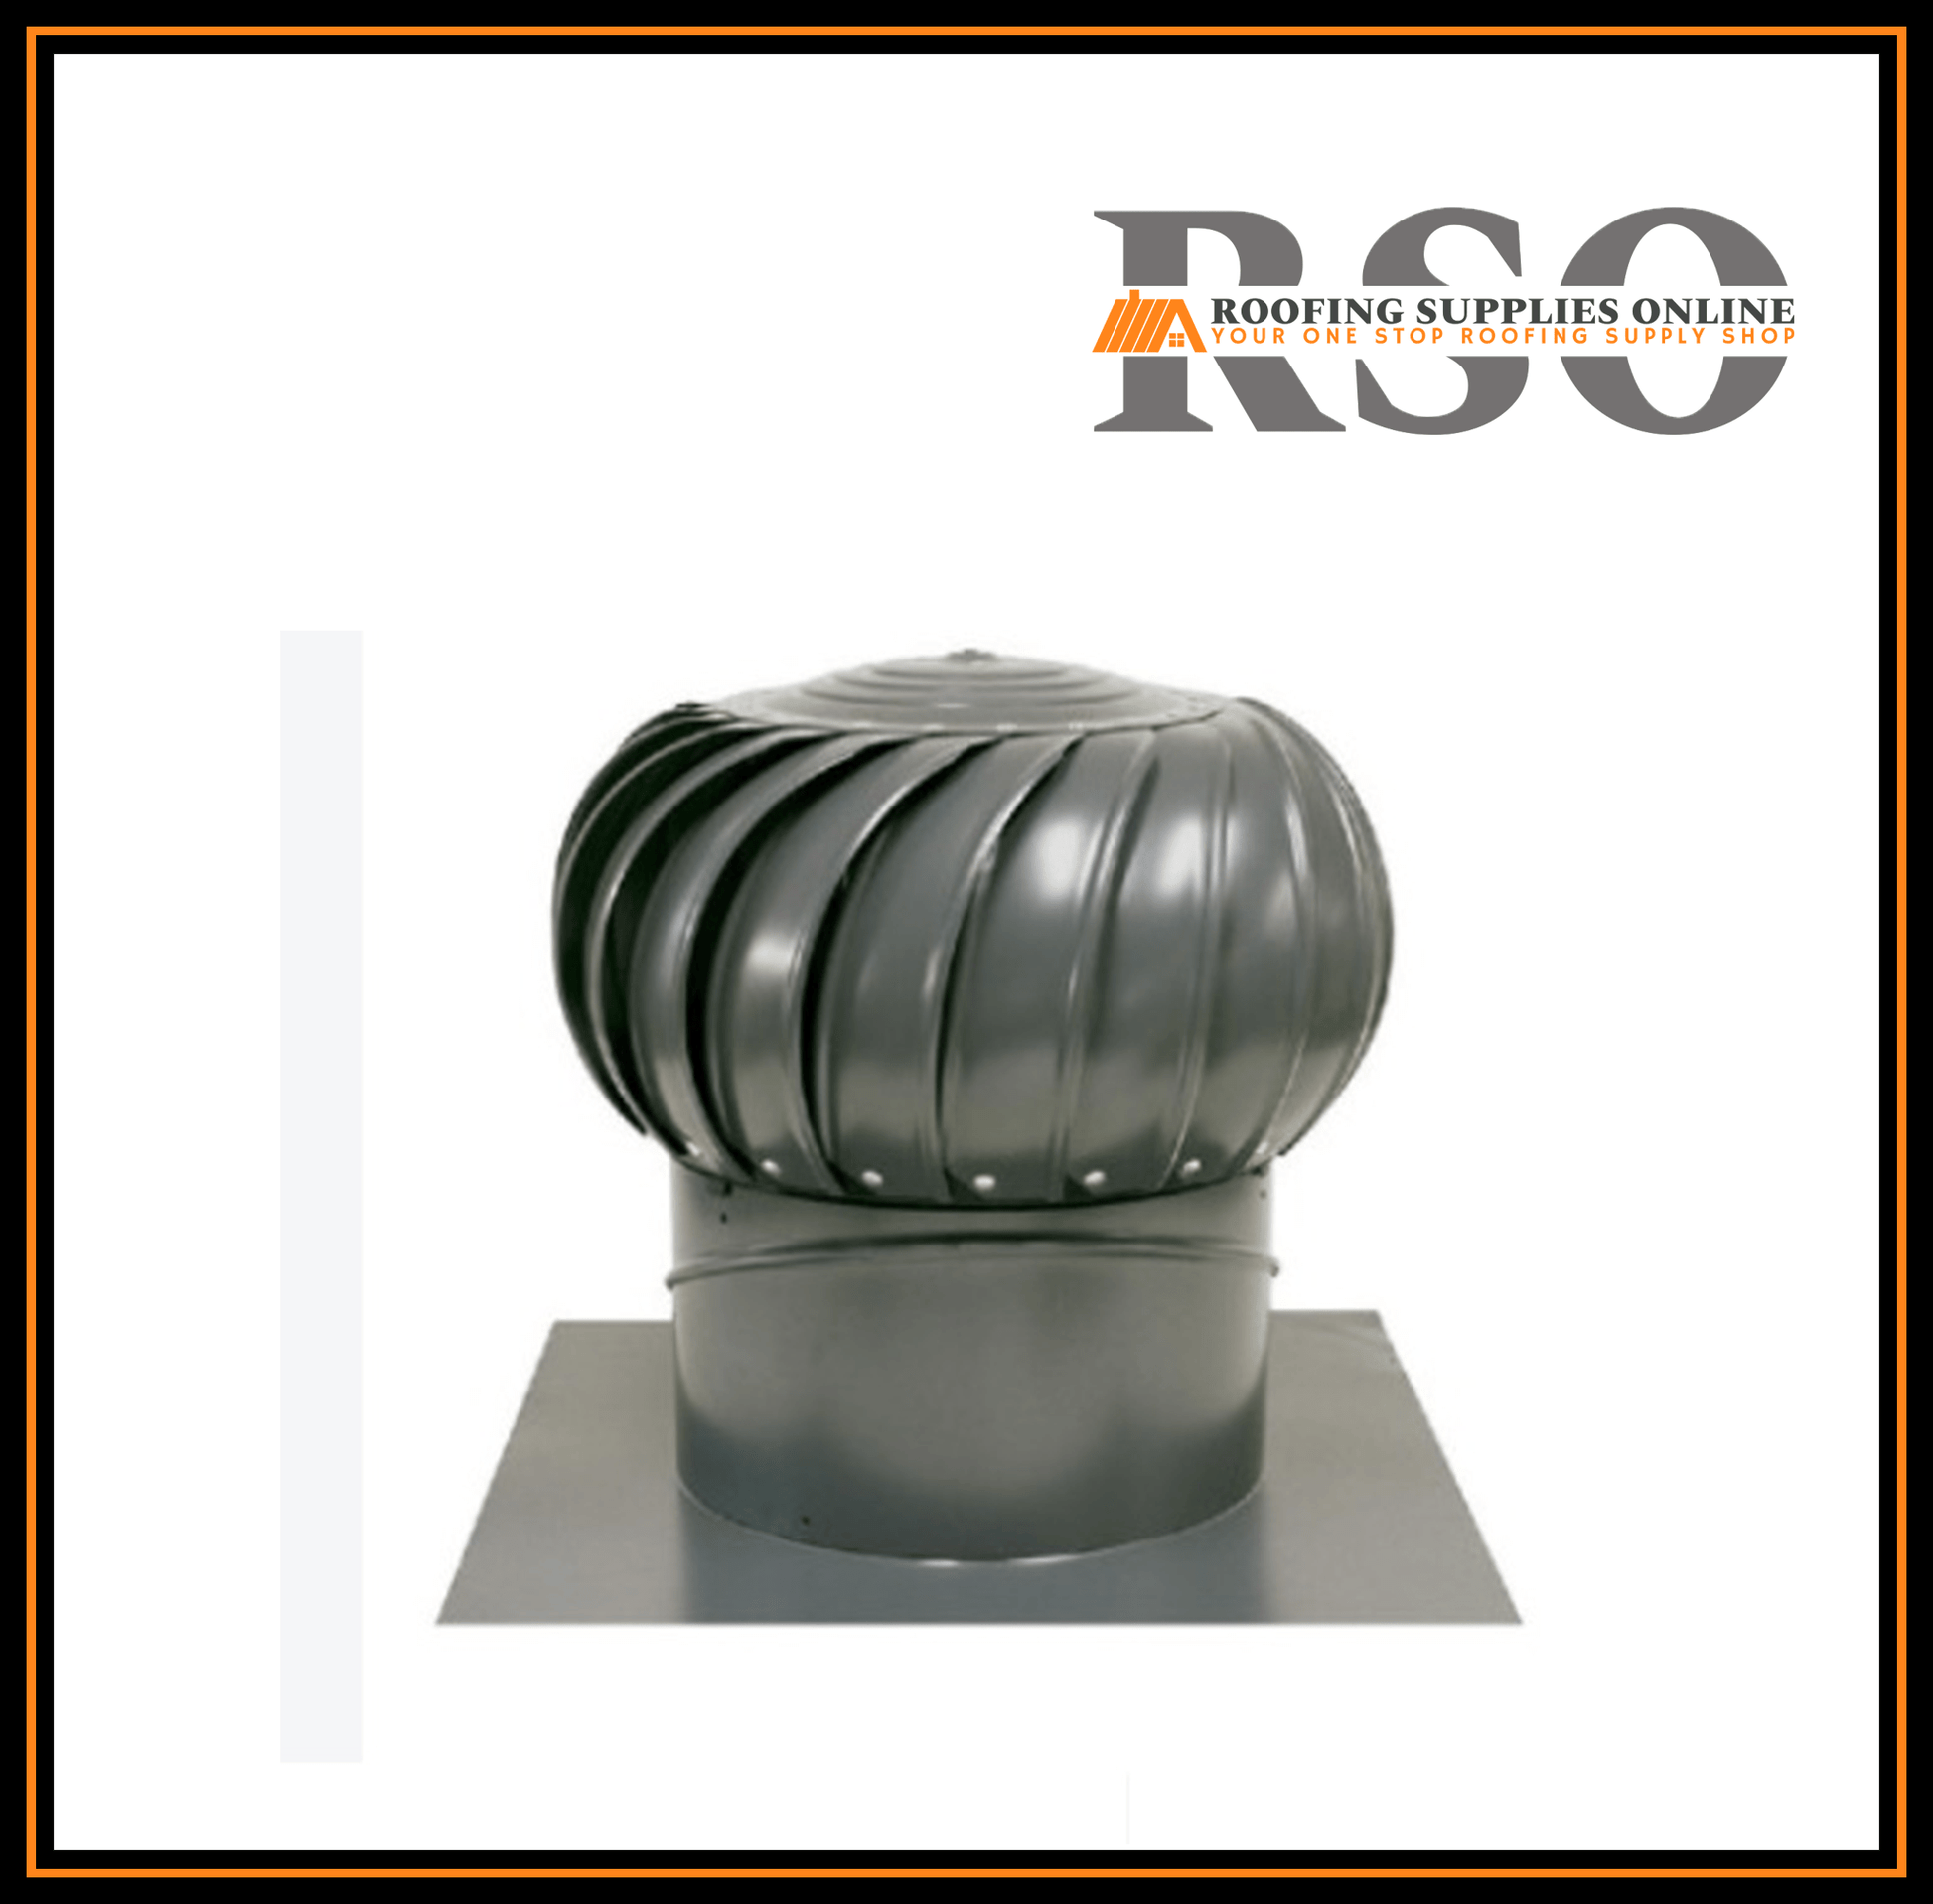 This is an image of a 300mm aluminum Rotary Roof vent. The colour is Woodland Grey by Colorbond.